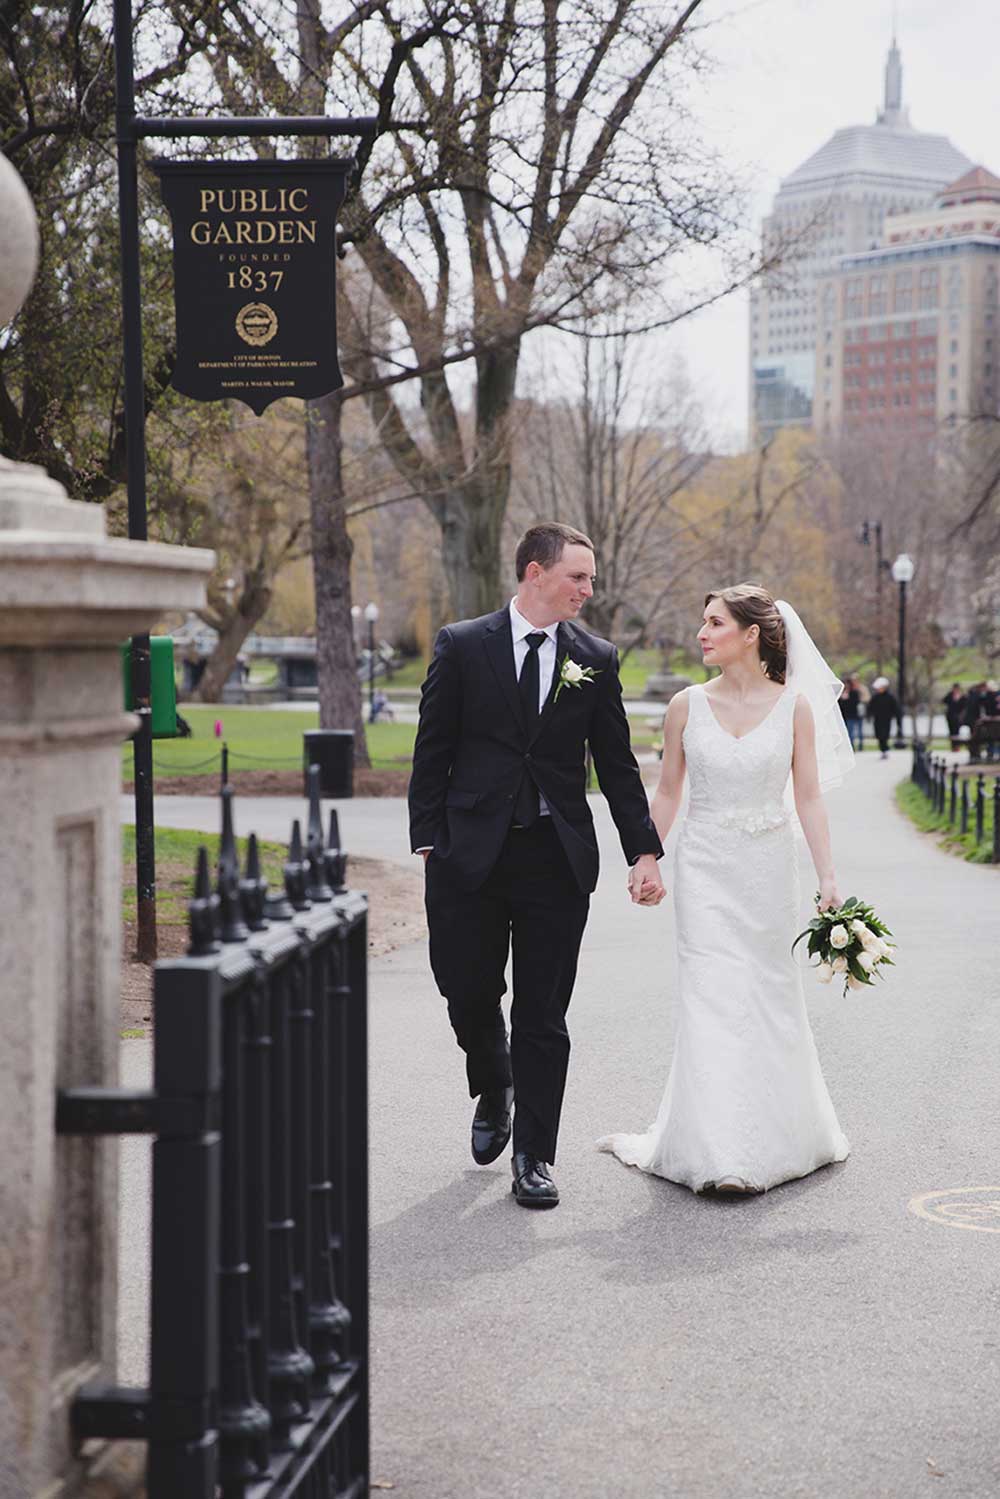 A documentary photograph of a wedding couple walking through the Boston Public Gardens during their wedding portrait session